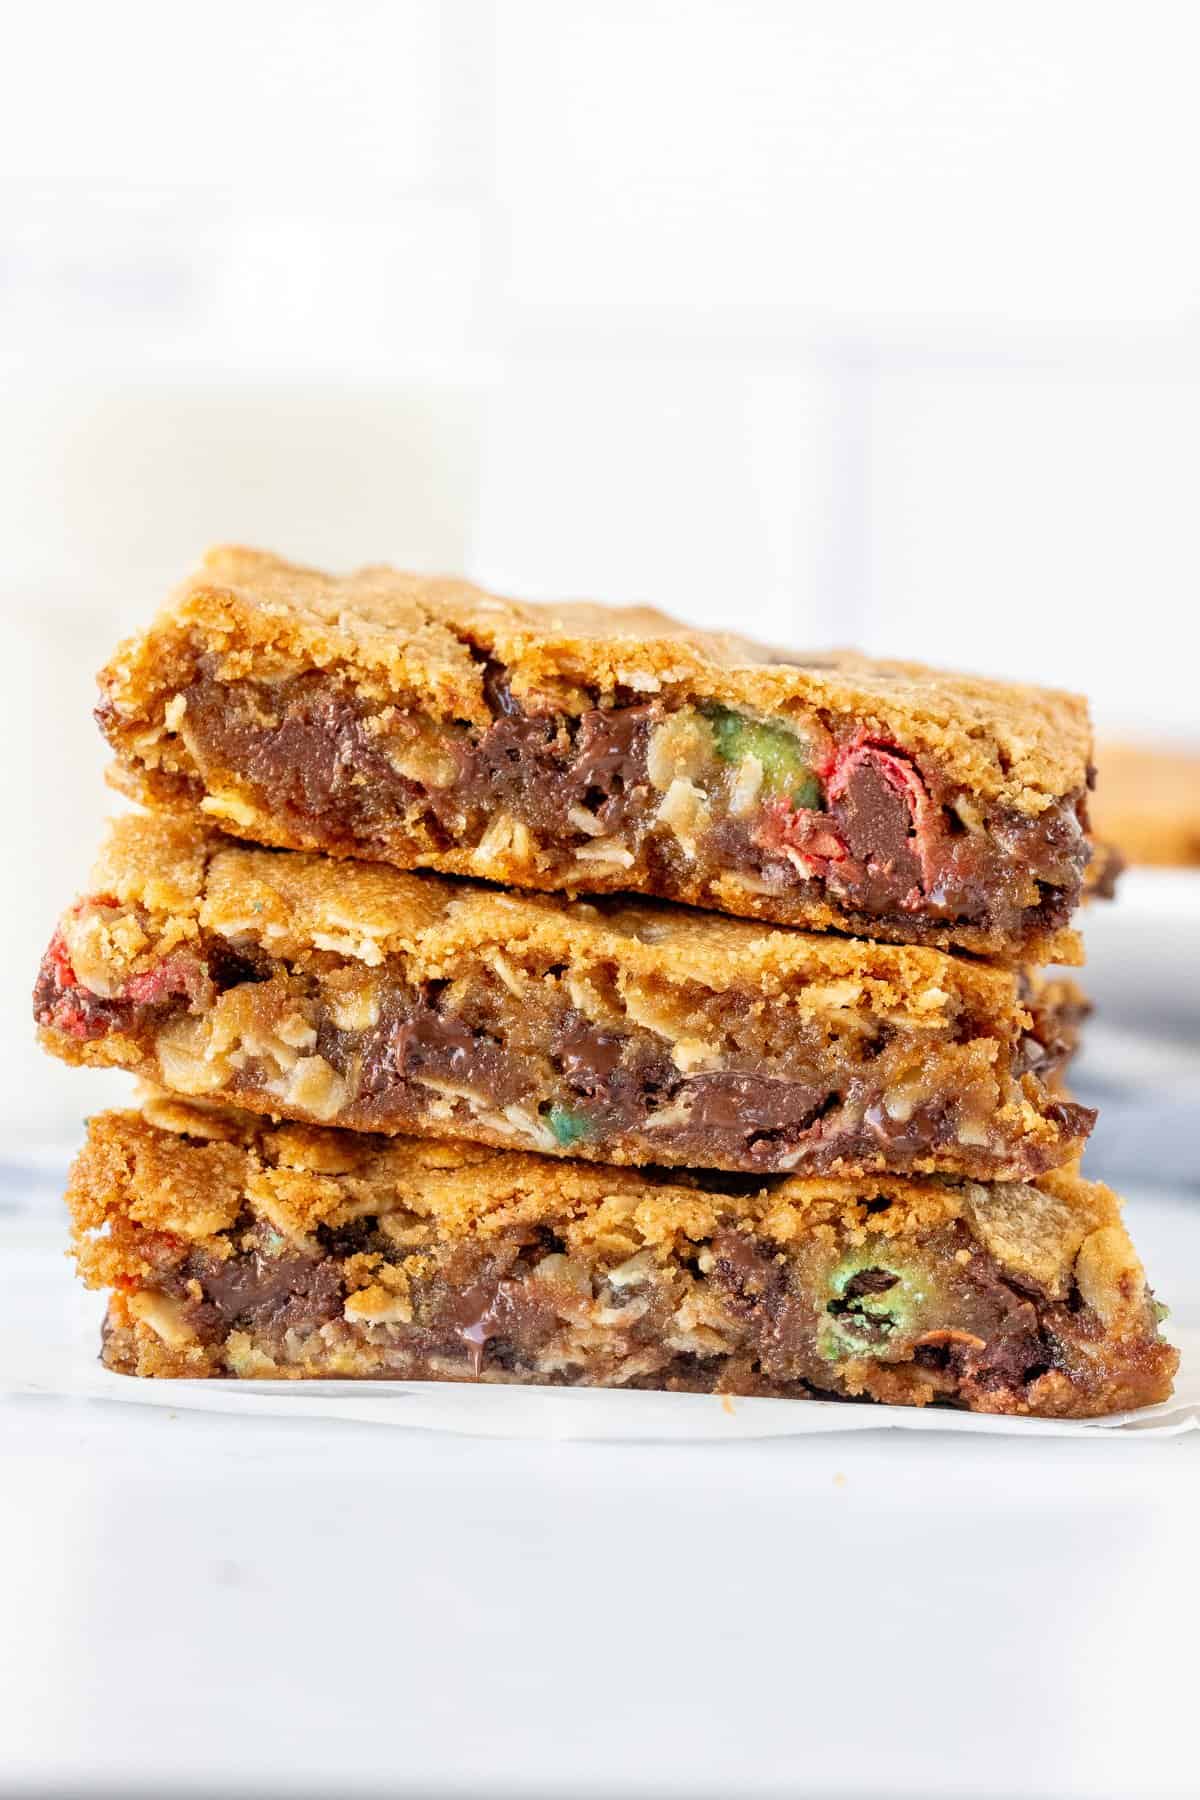 Stack of three monster cookie bars, one on top of each other